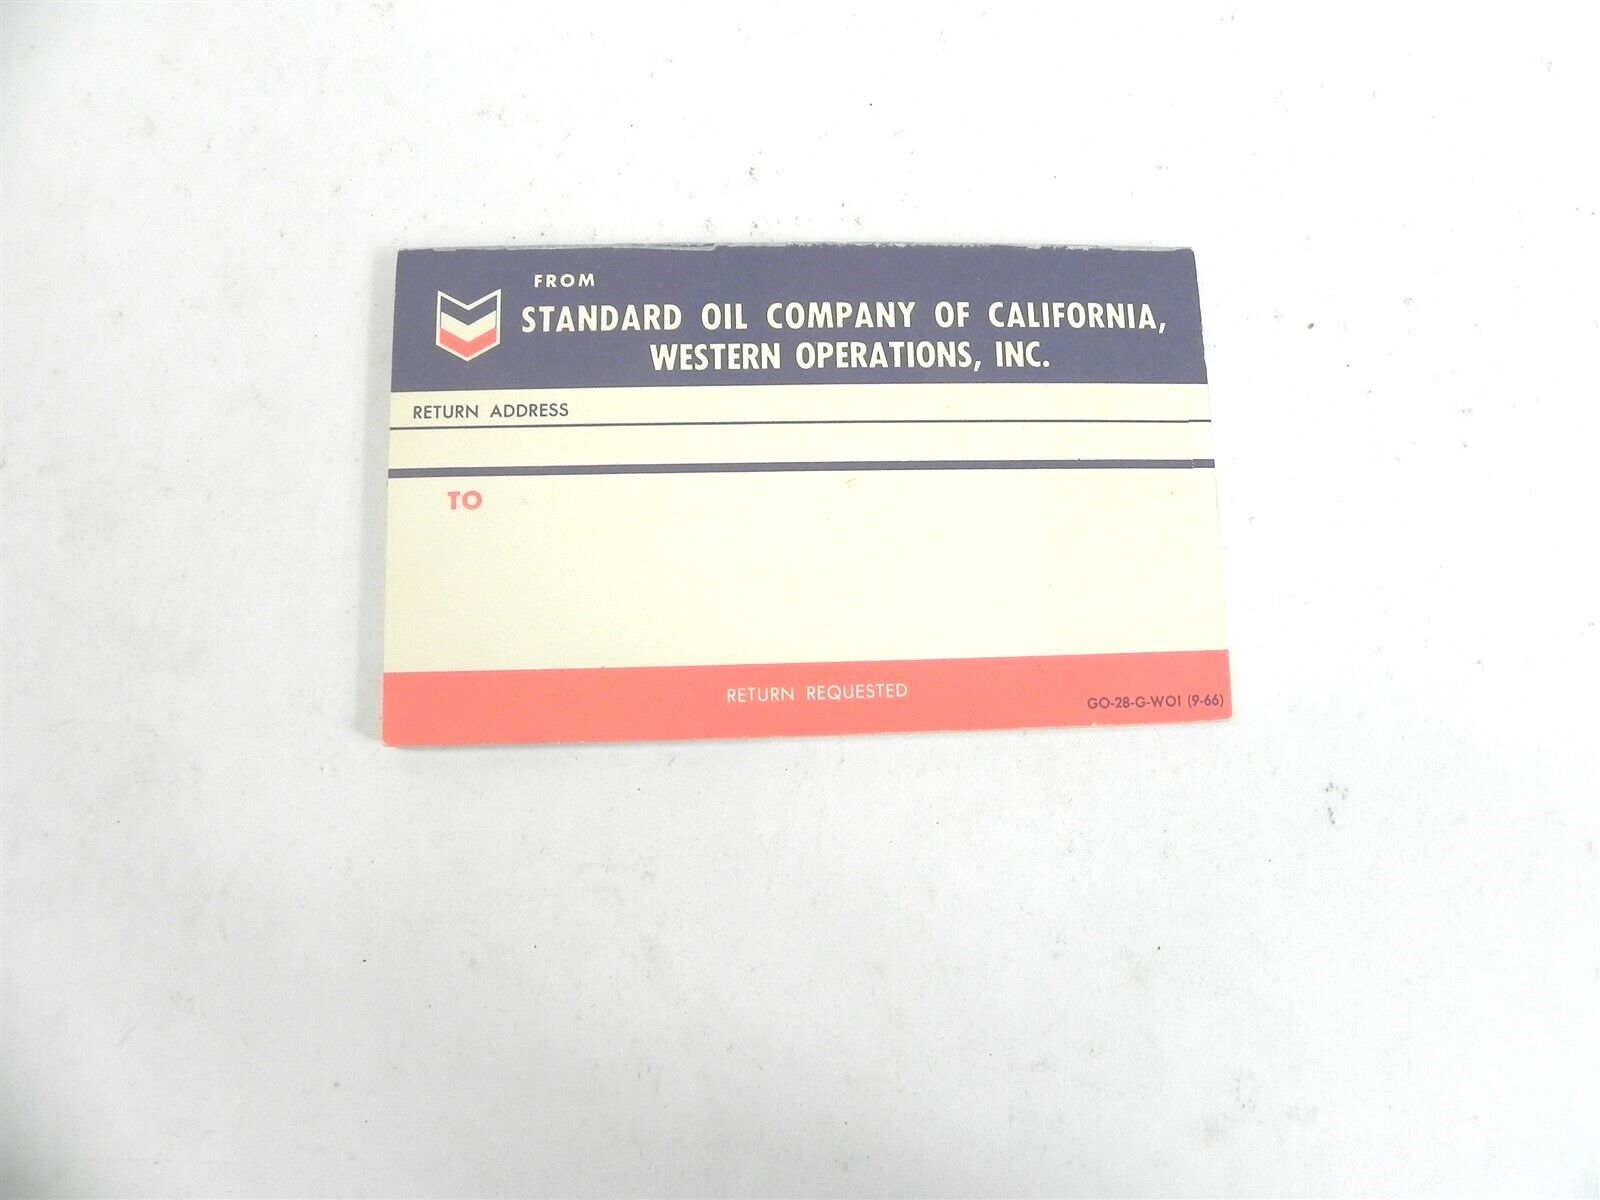 VINTAGE 1966 STANDARD OIL COMPANY OF CALIFORNIA RETURN REQUESTED LABELS 3 X 5 